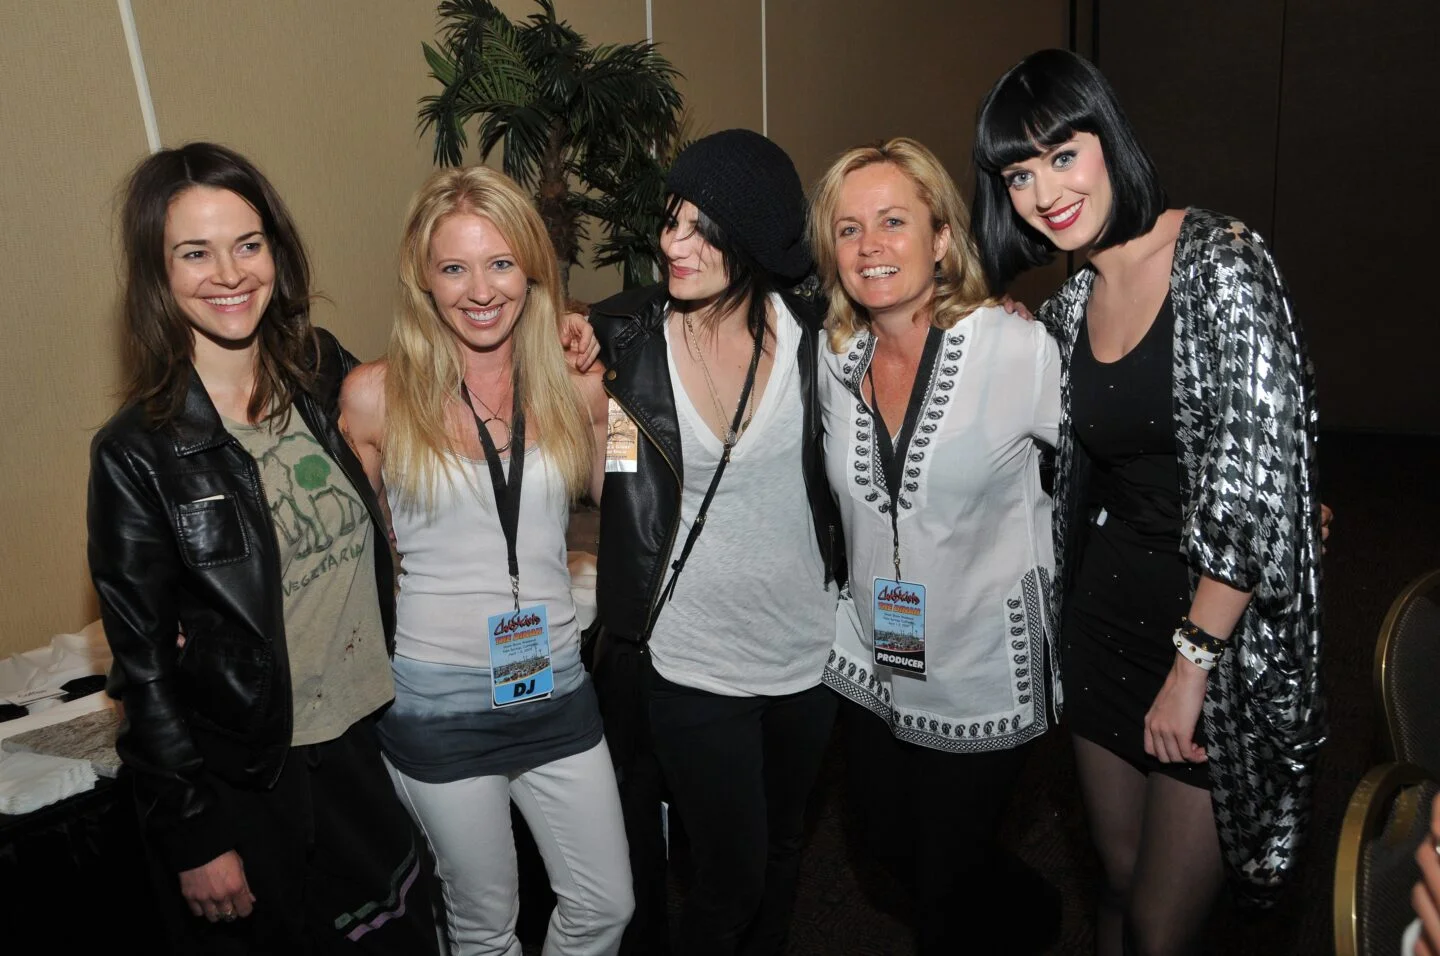 The Dinah - Mariah Hanson with Katy Perry and the cast of The L Word